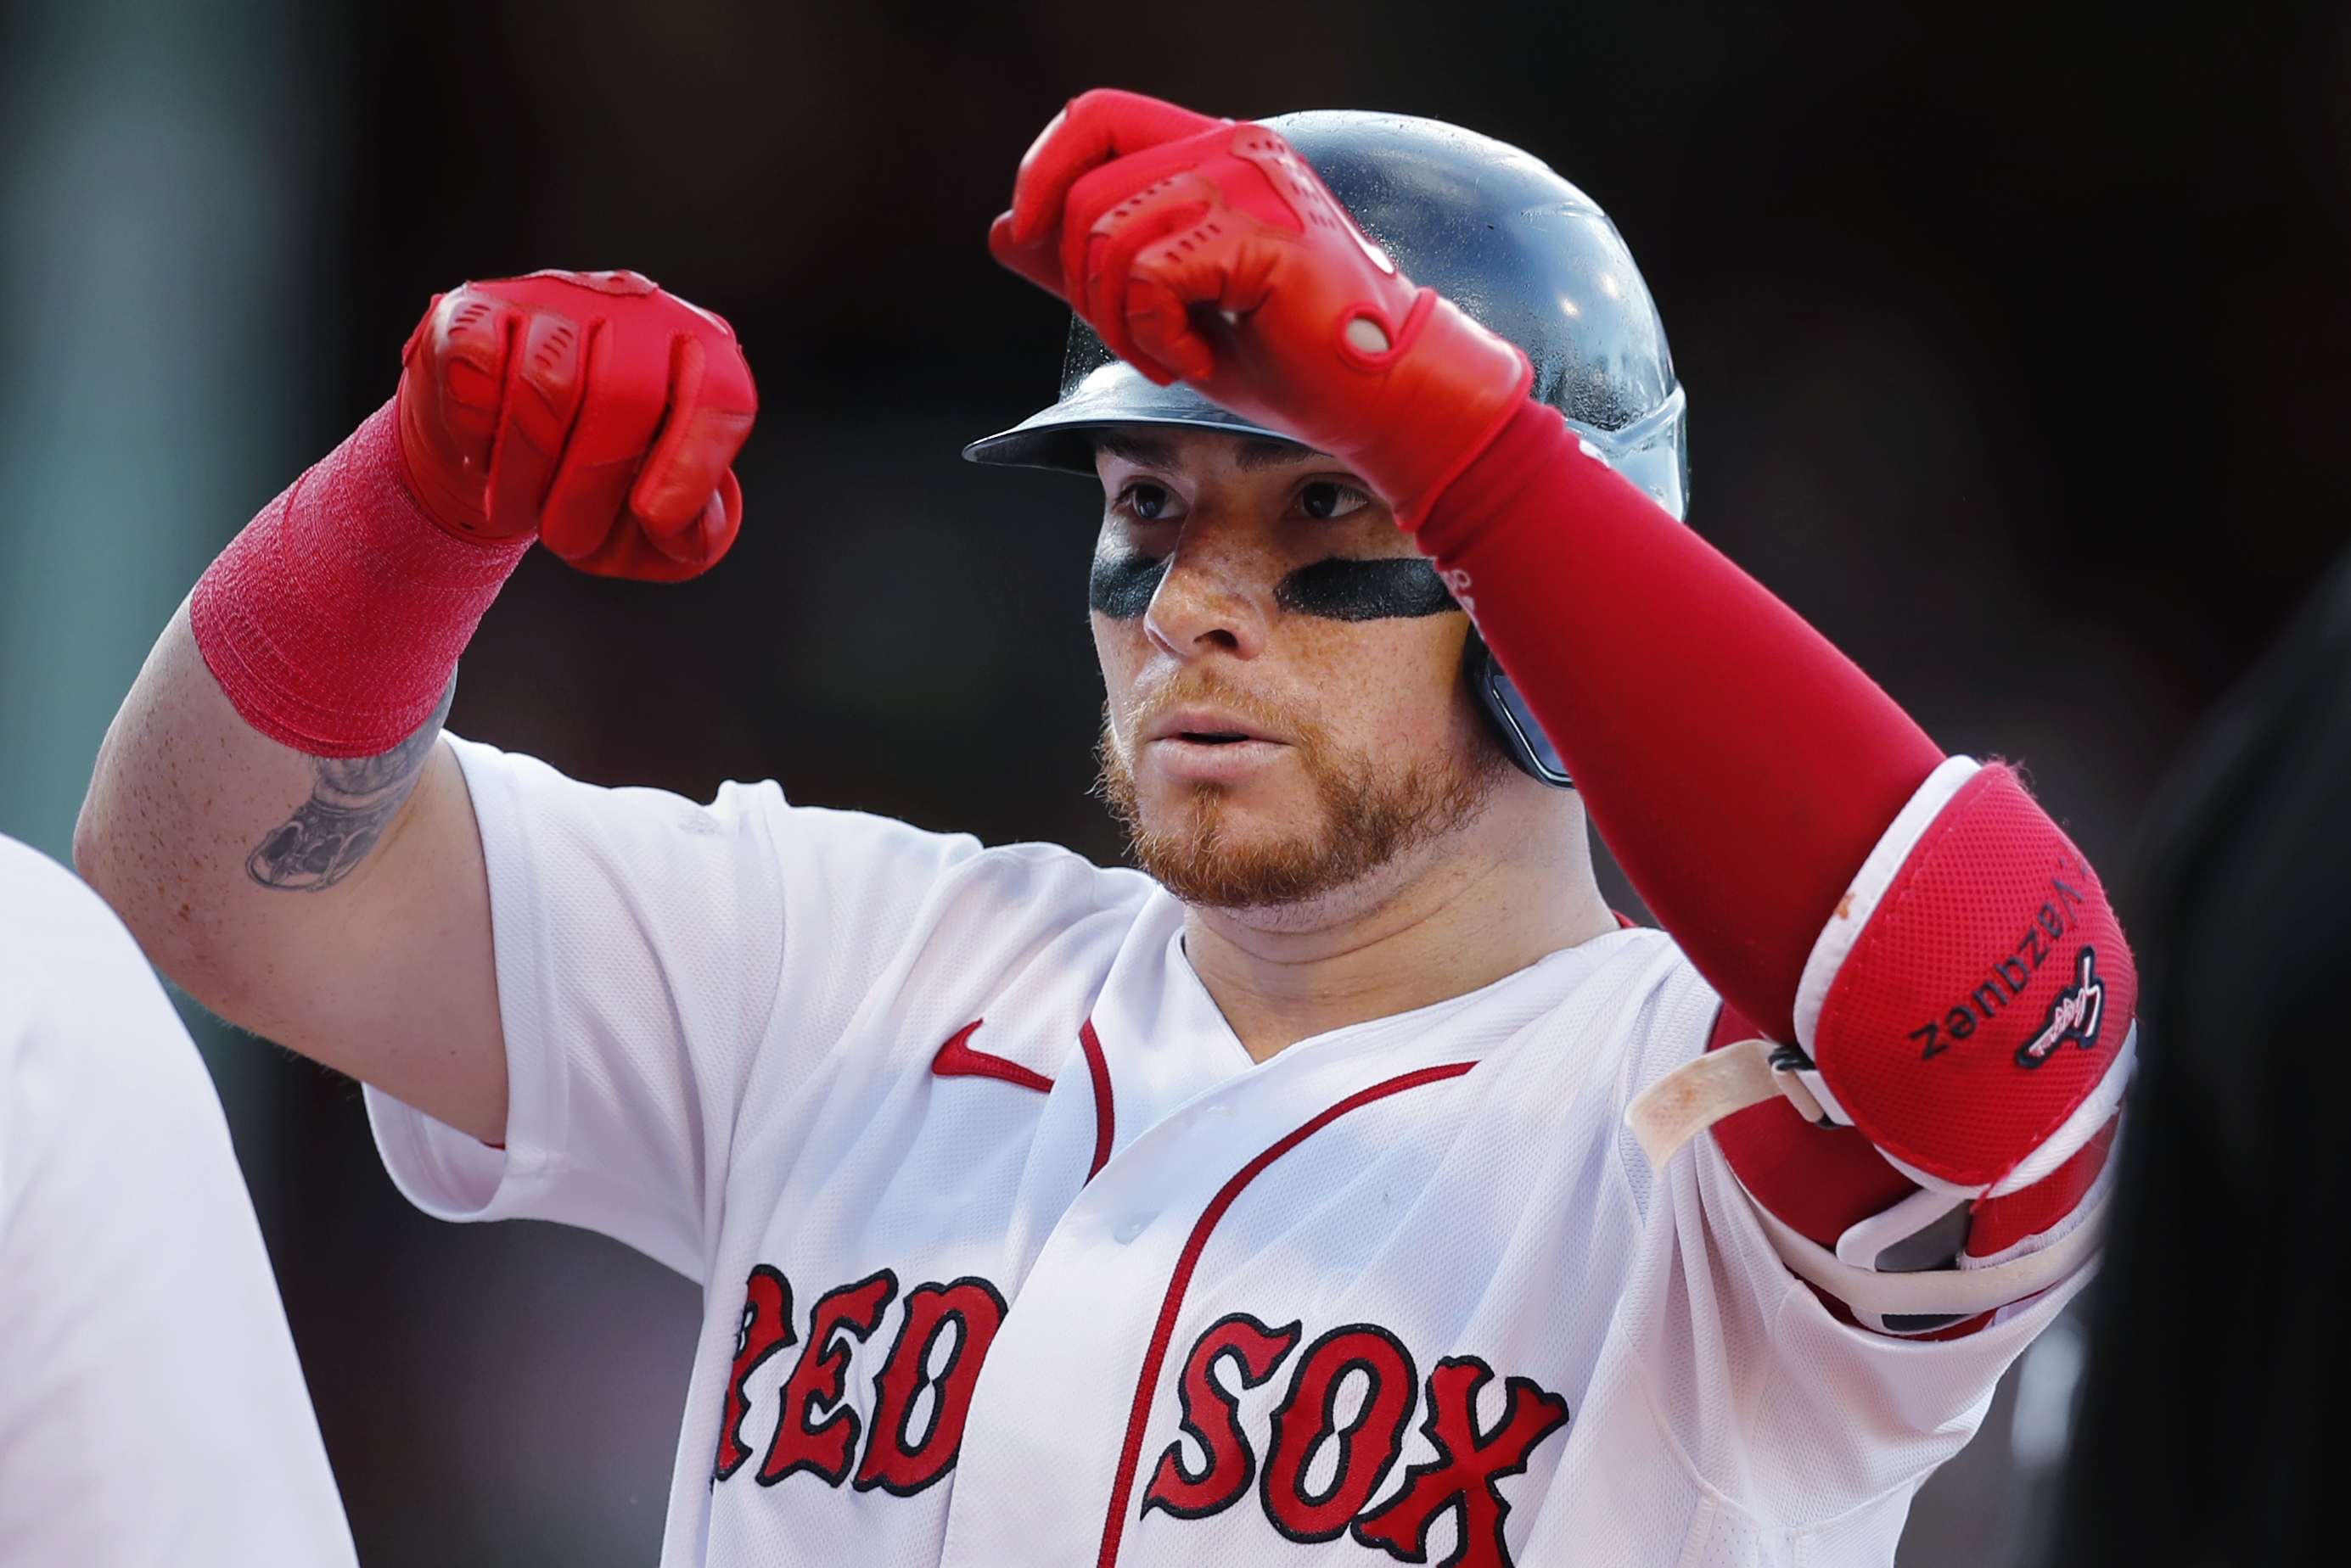 How Ex-Red Sox Christian Vázquez Has Performed Since Trade To Astros